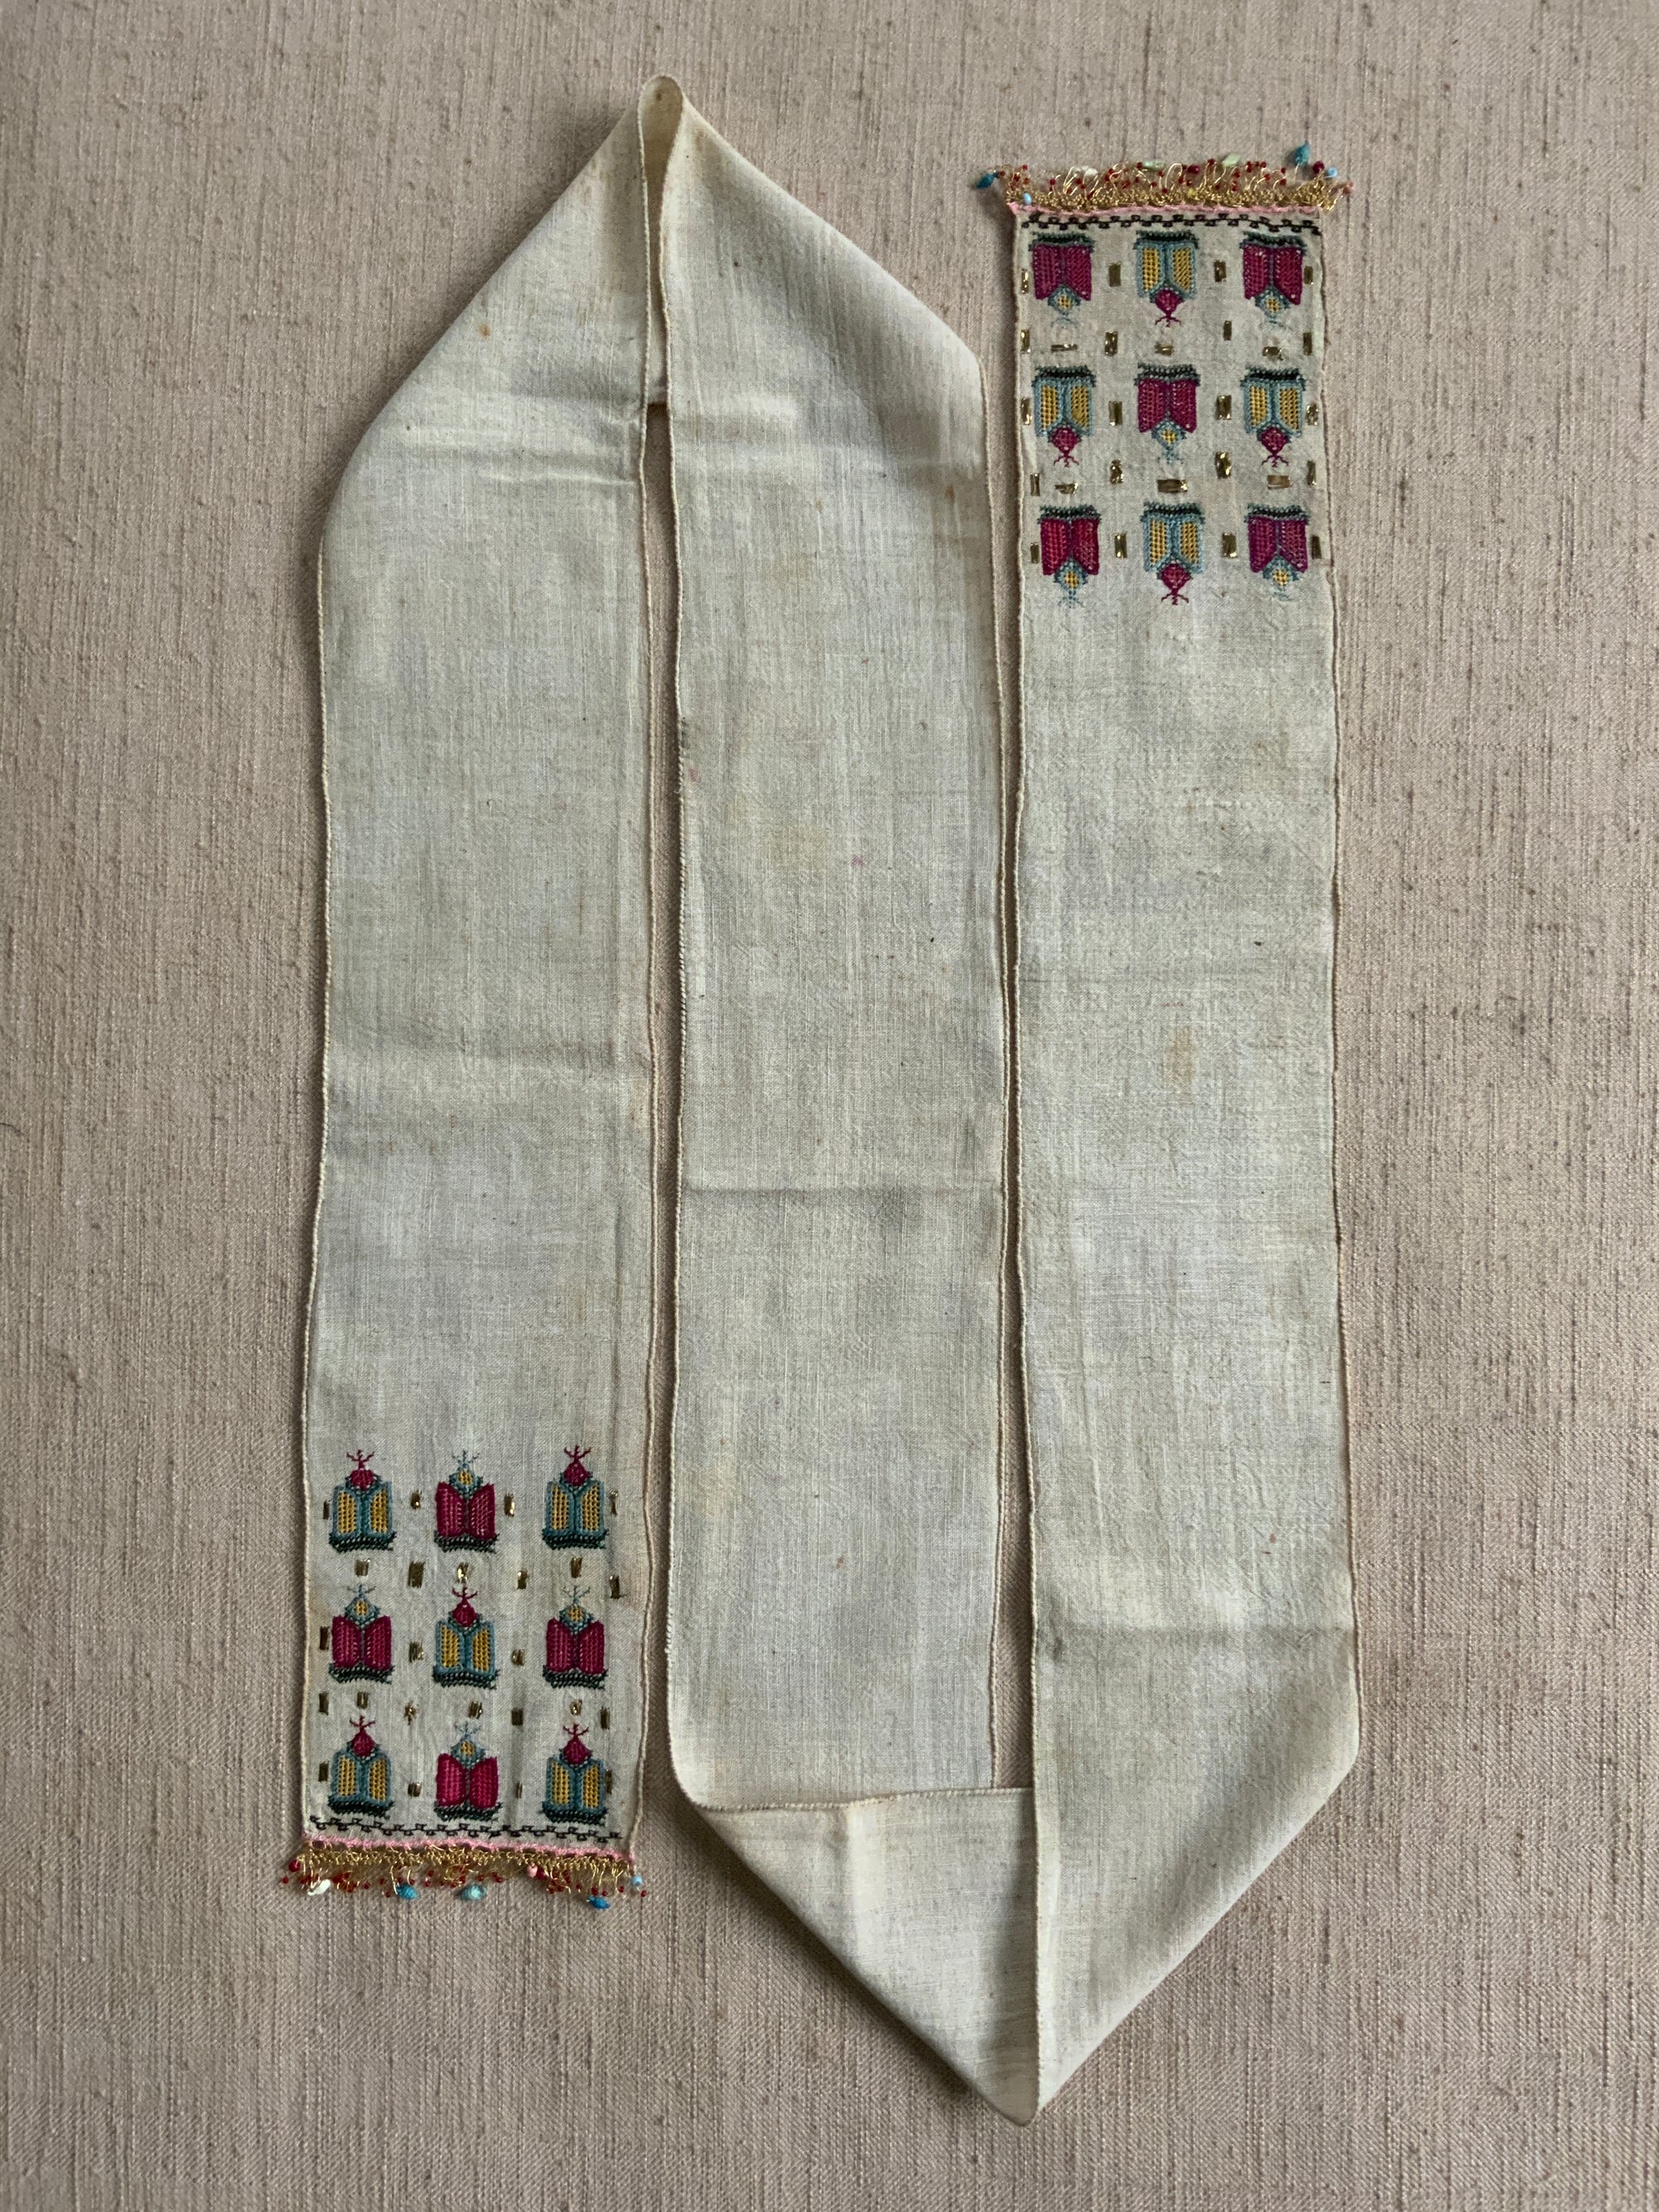 Turkish vintage embroidery band (220 x 13cm)